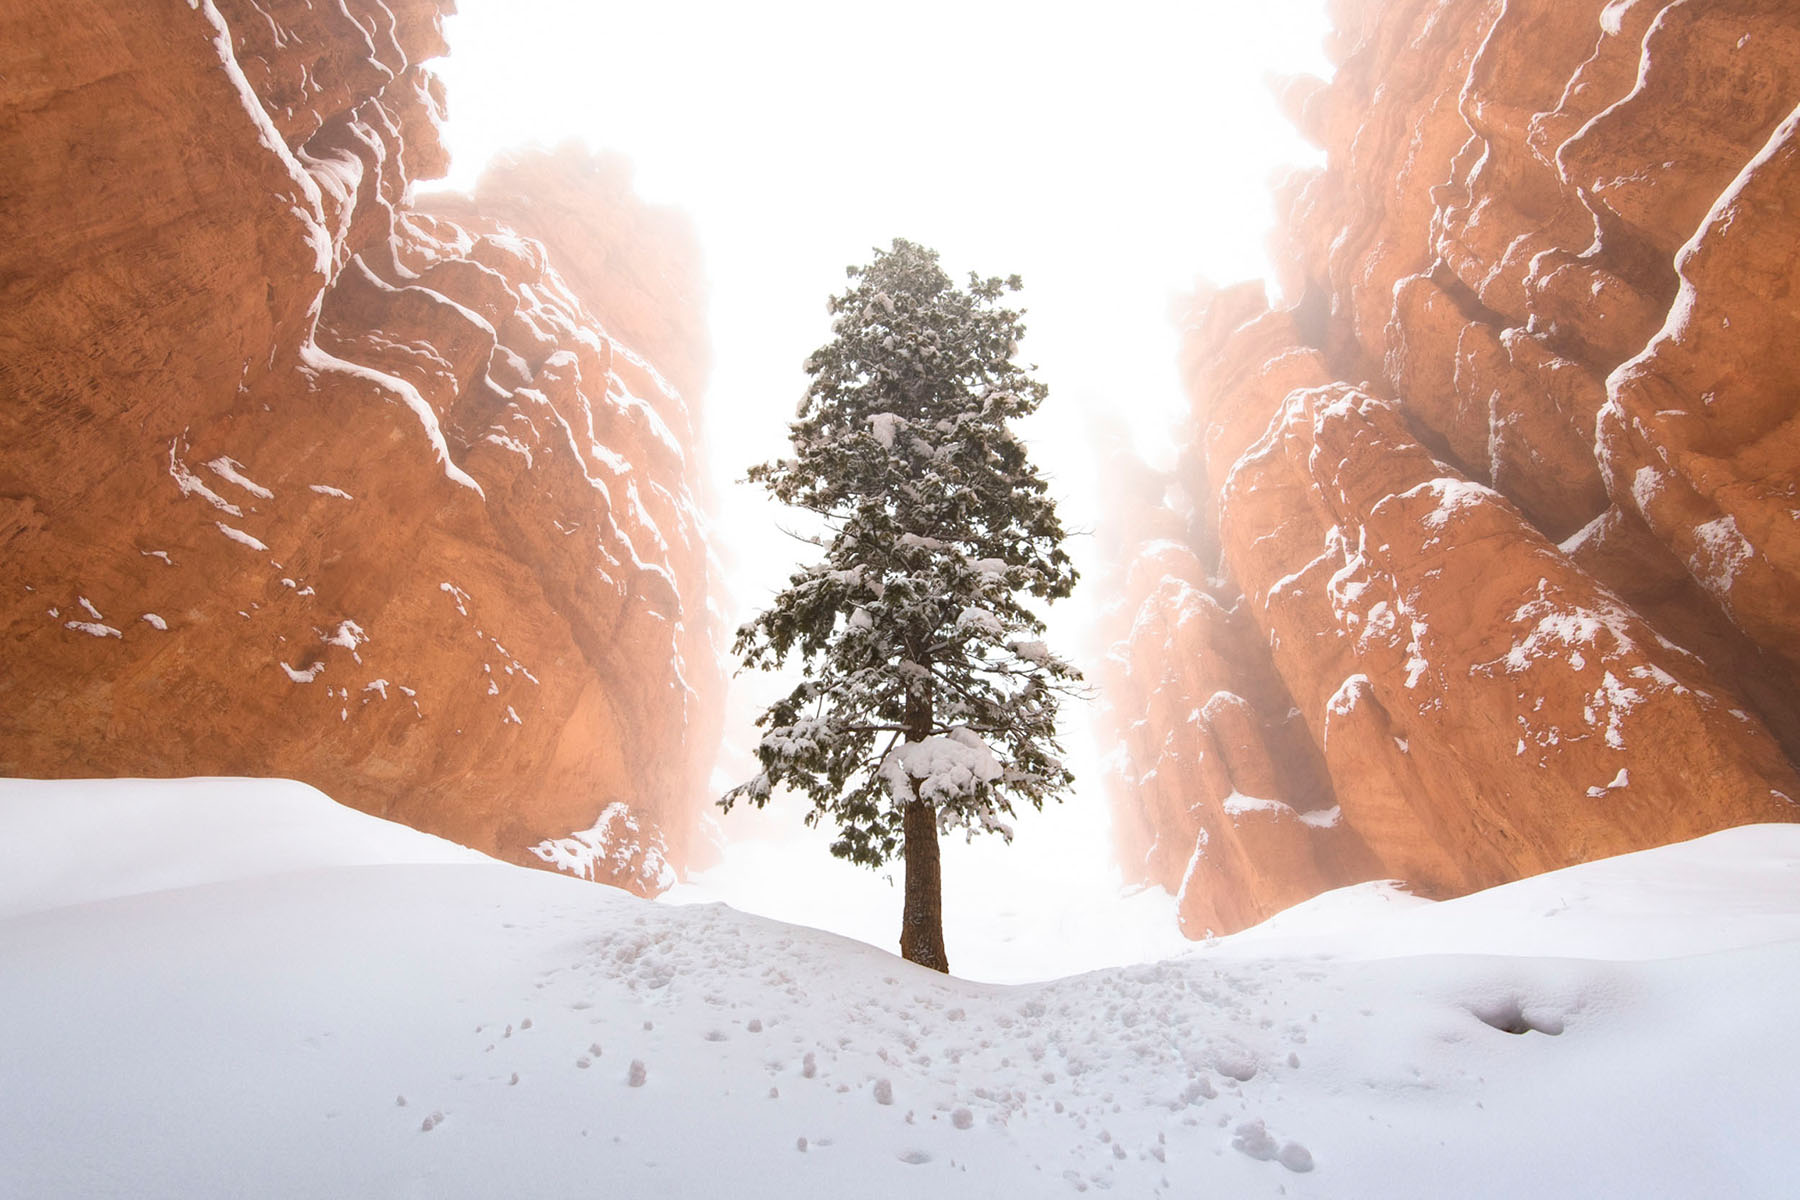 Bryce National Park during winter with Tree and Hoodoos